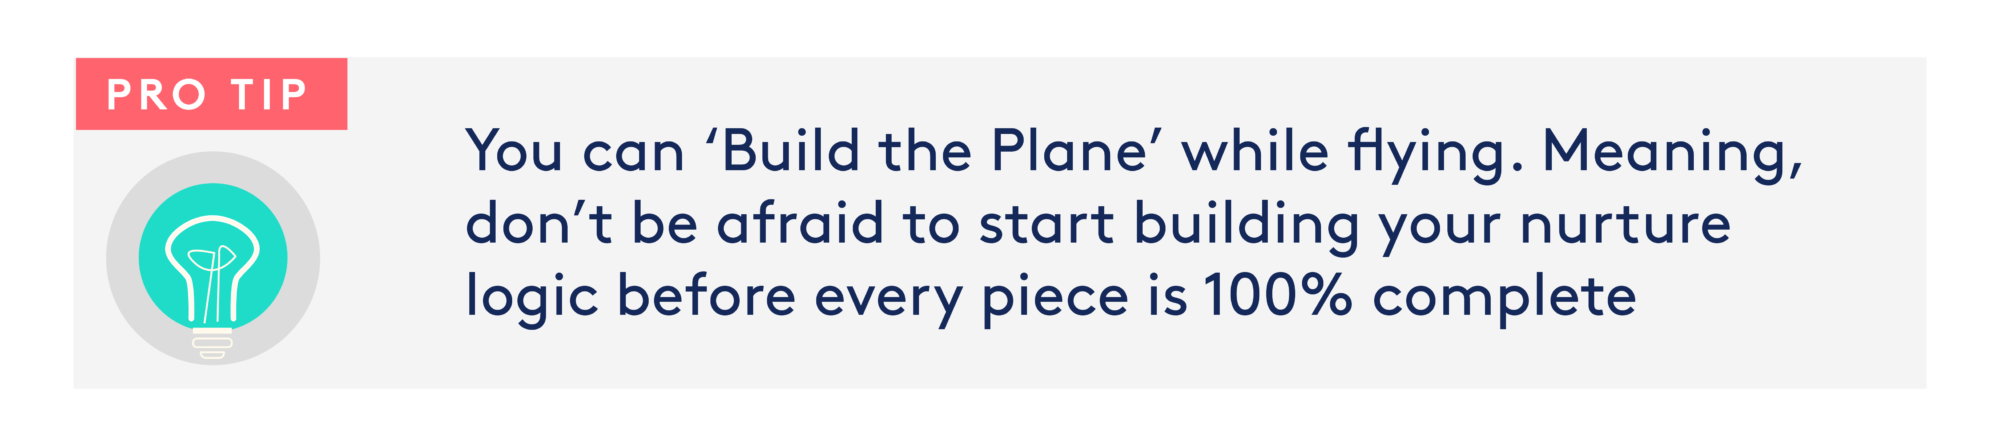 Image: Lightbulb Text: Pro Tip: You can 'Build the Plane' while flying. Meaning, don't be afraid to start building your nuture logic before every piece is 100% complete.